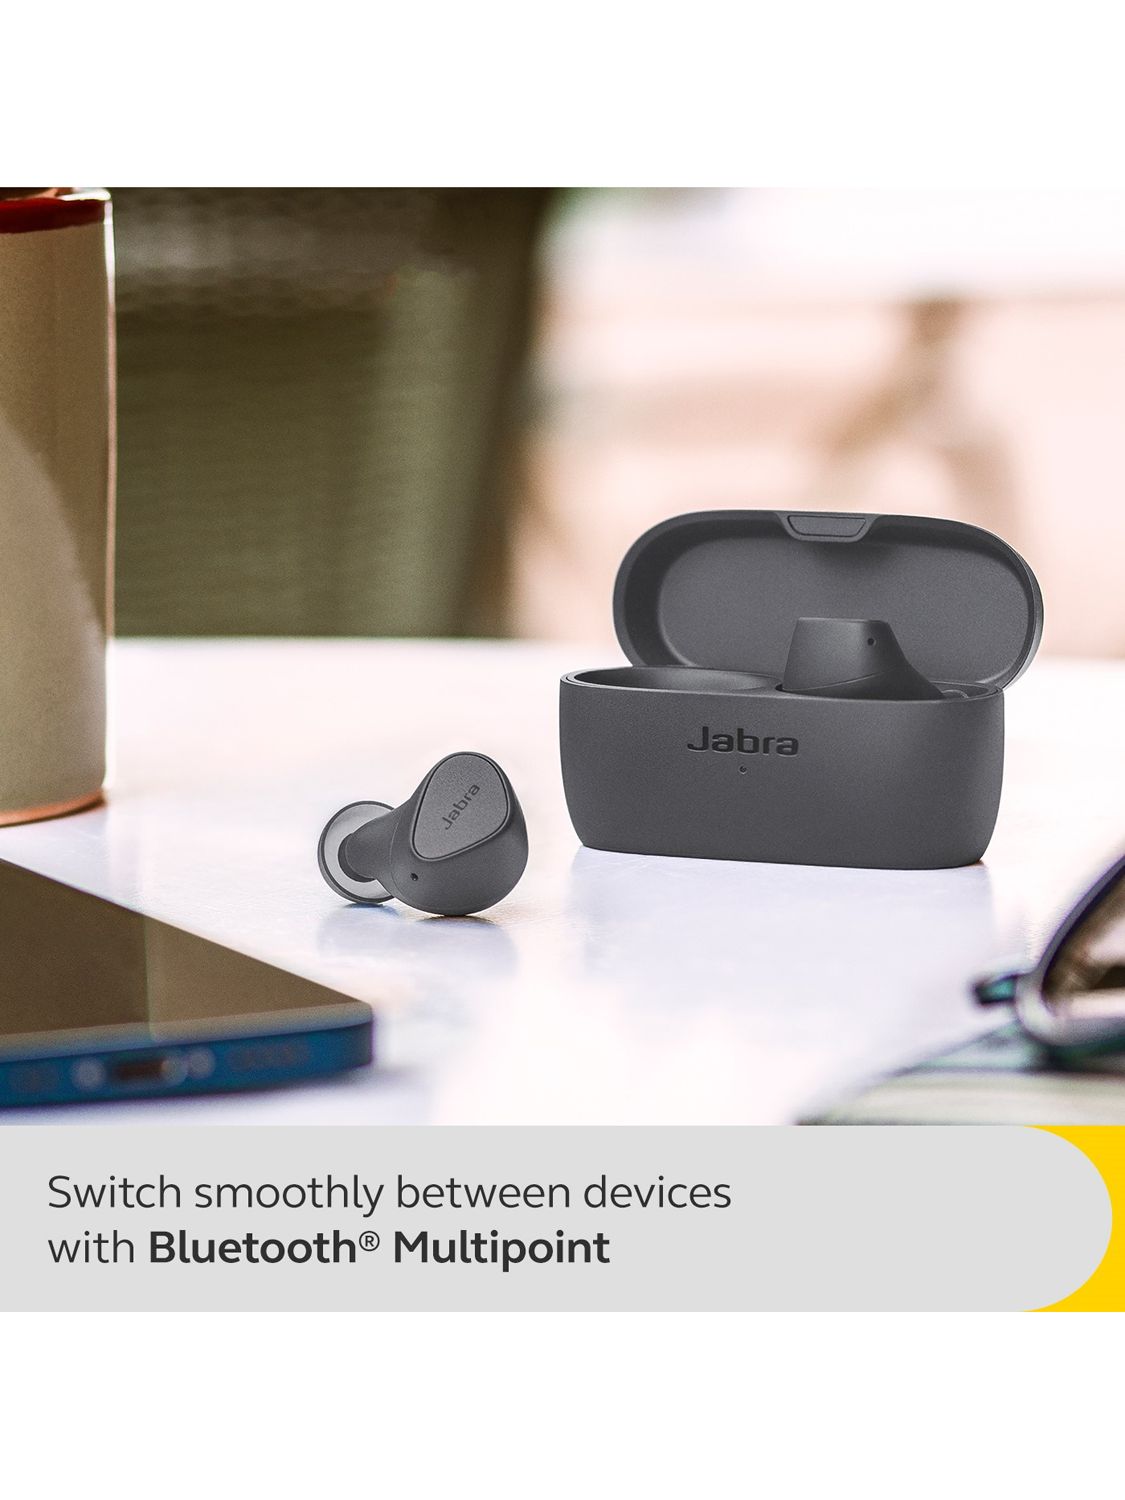  Jabra Elite 4 True Wireless Earbuds - Active Noise Cancelling  Headphones - Discreet & Comfortable Bluetooth Earphones, Laptop, iOS and  Android Compatible - Lilac : Everything Else